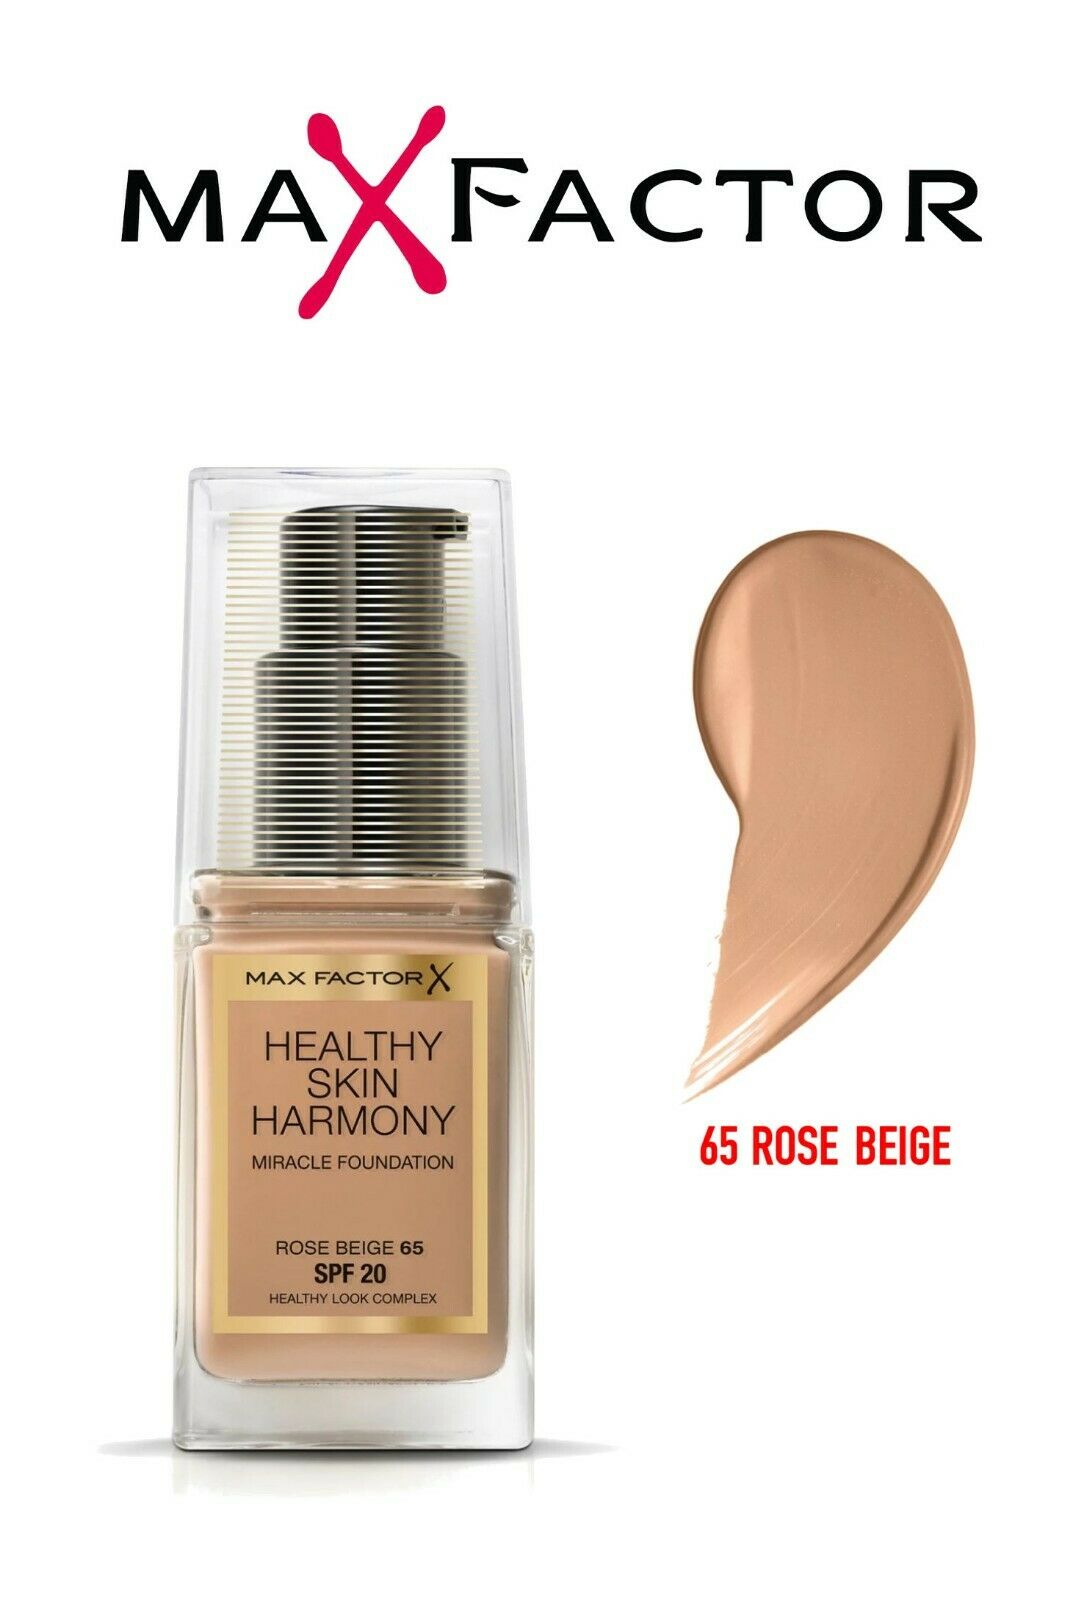 Maxfactor Healthy Mix Harmony Miracle Foundation 65 Rose Beige